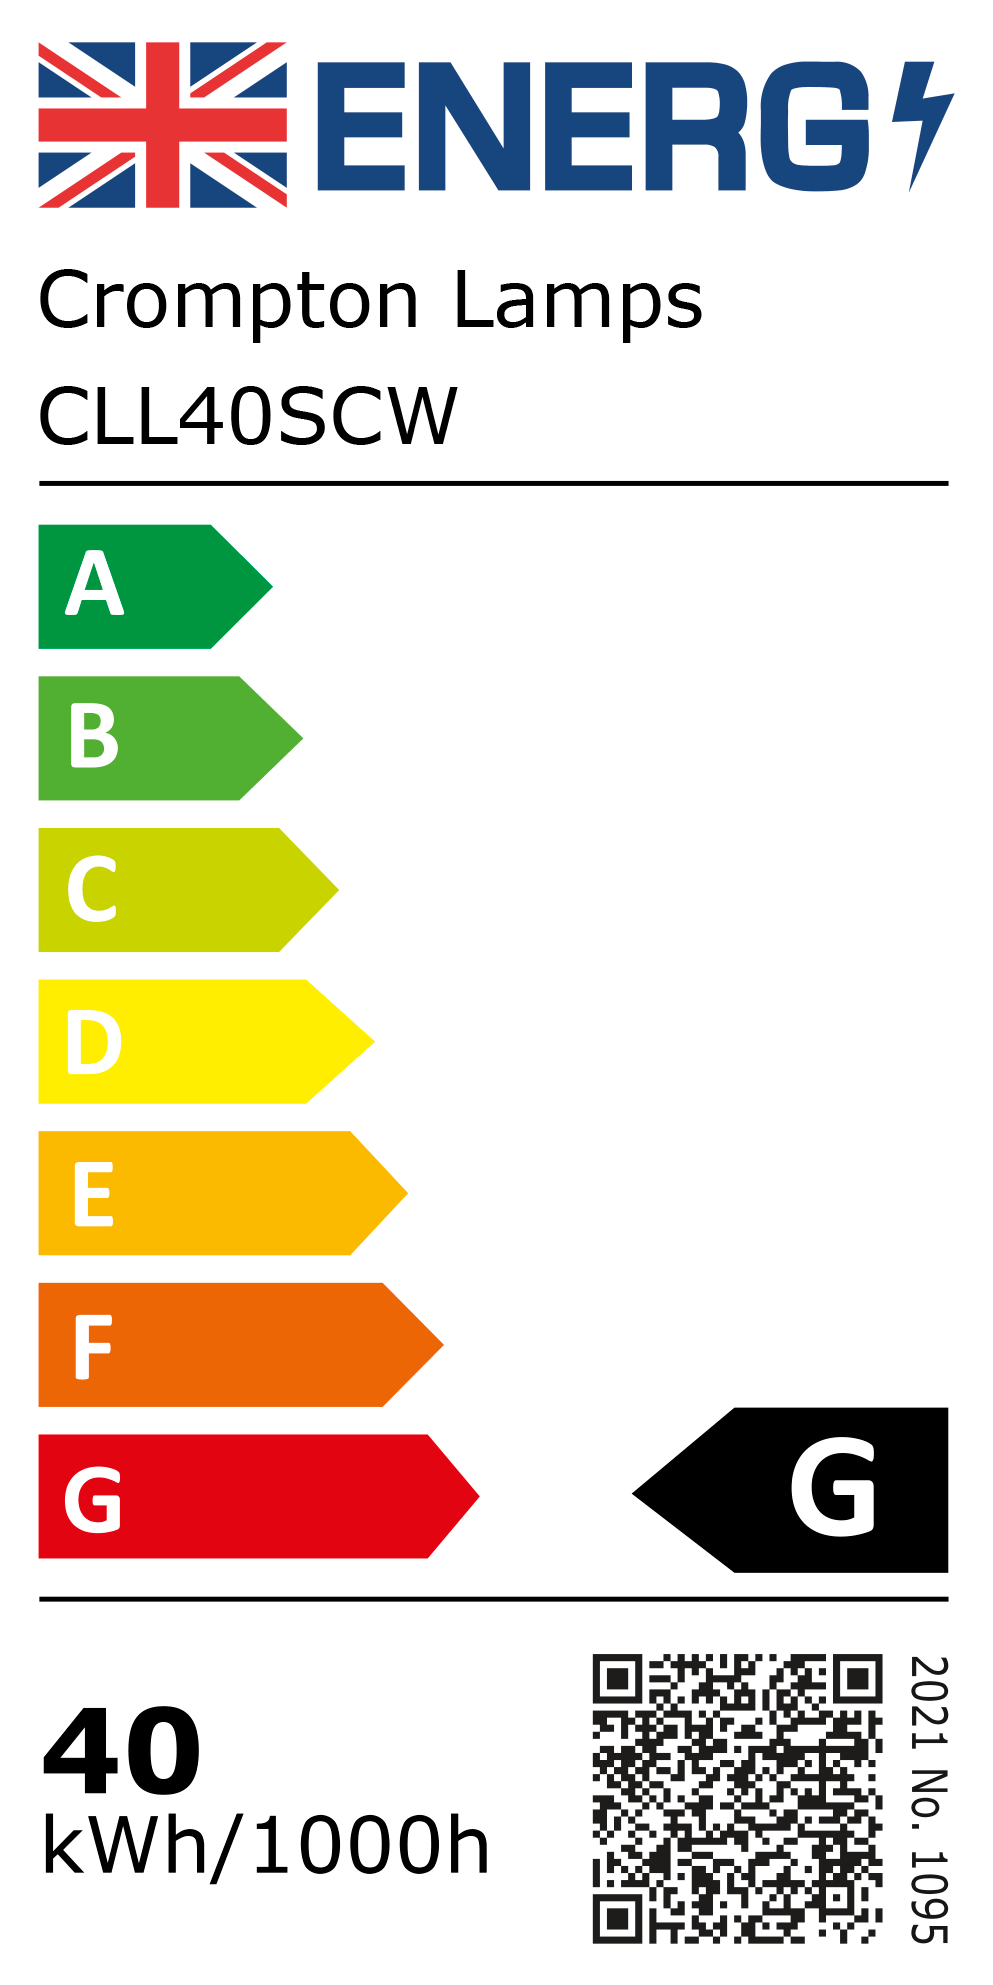 New 2021 Energy Rating Label: Stock Code CLL40SCW